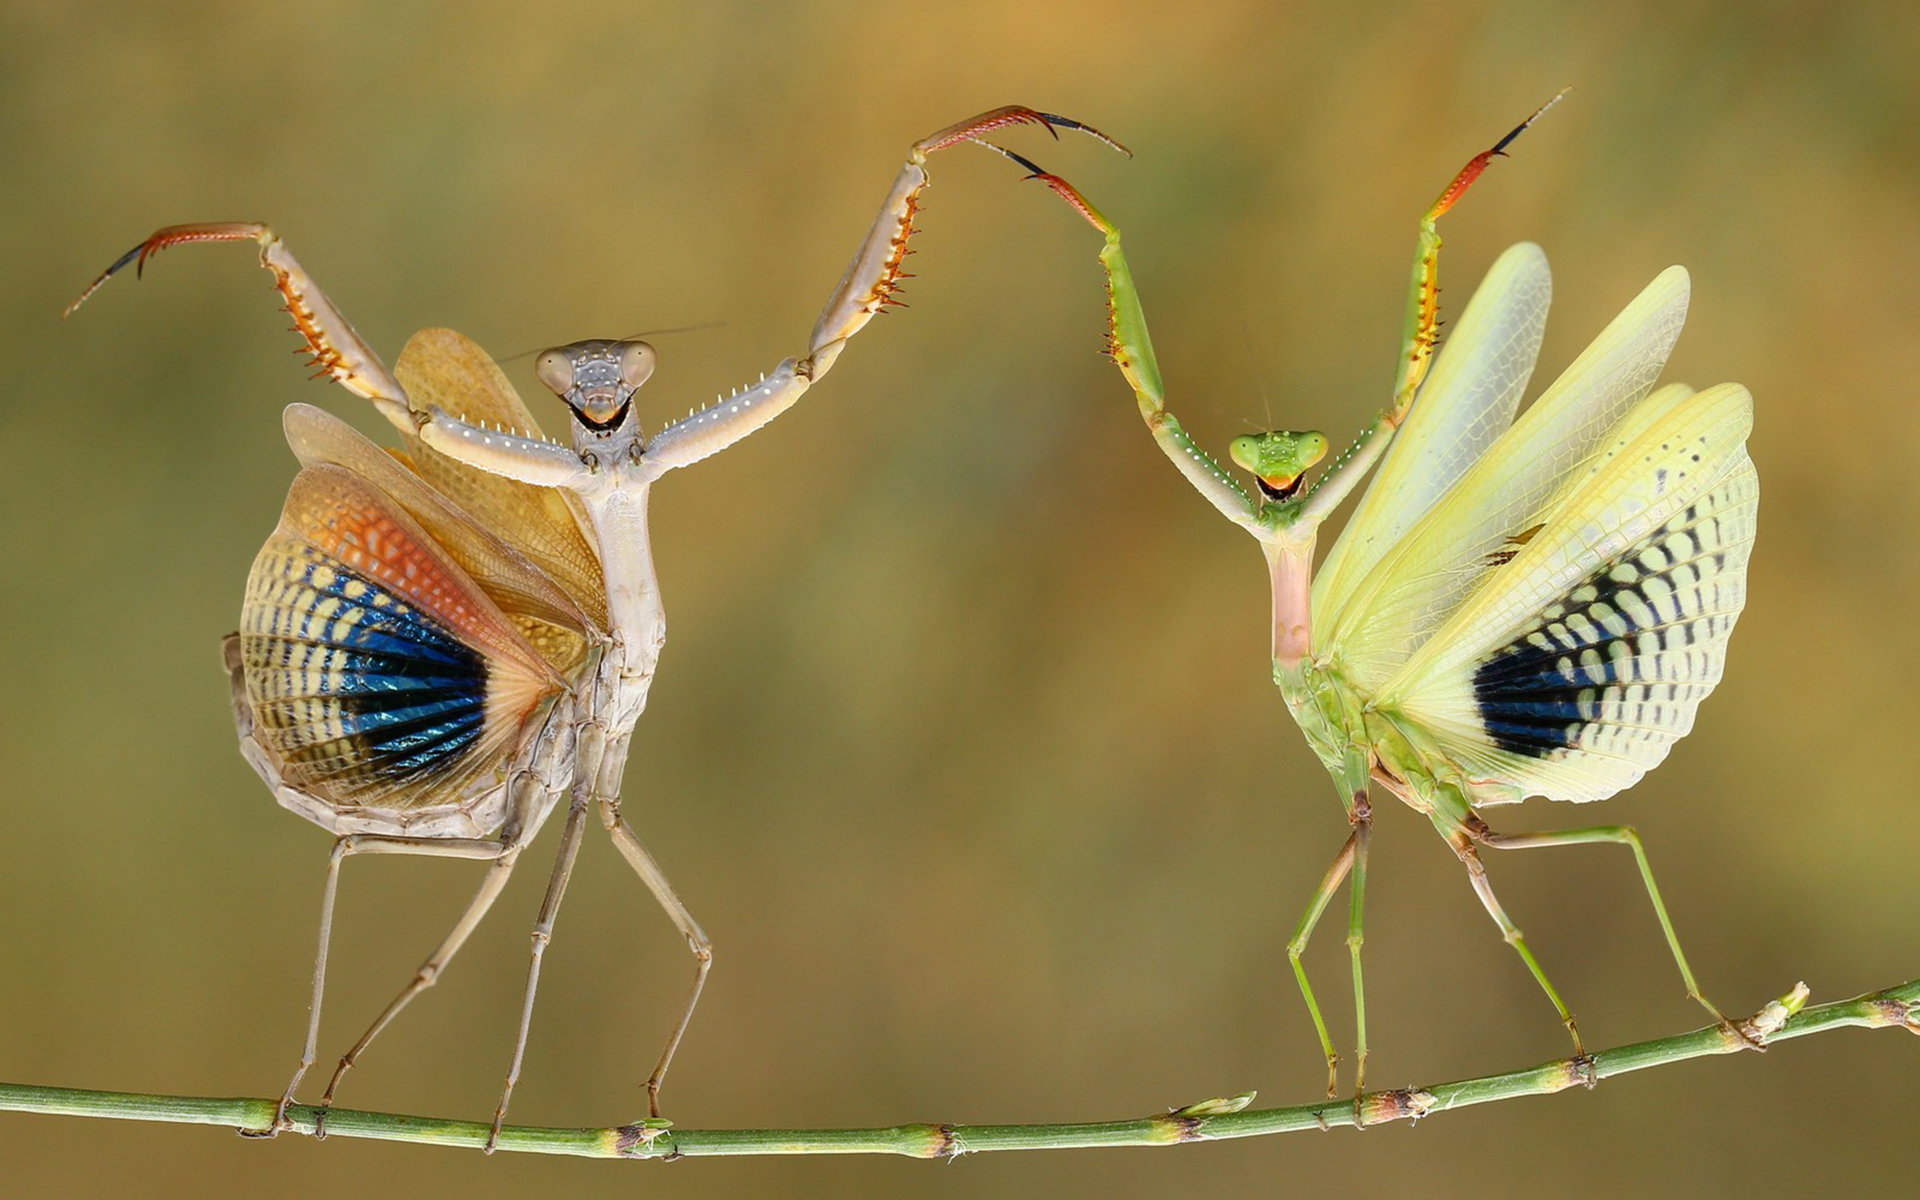 grasshopper, animal, praying mantis, insect, insects